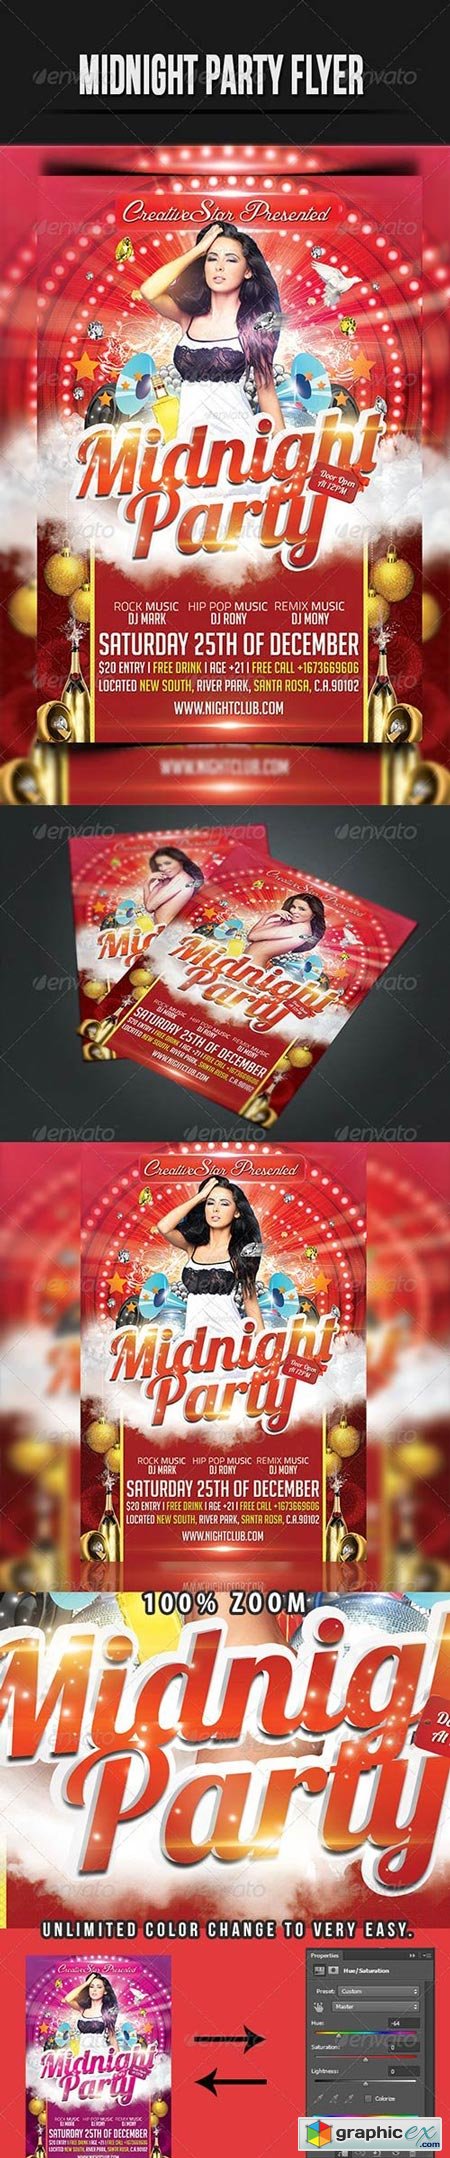 MidNight Party Flyer Template 4579397